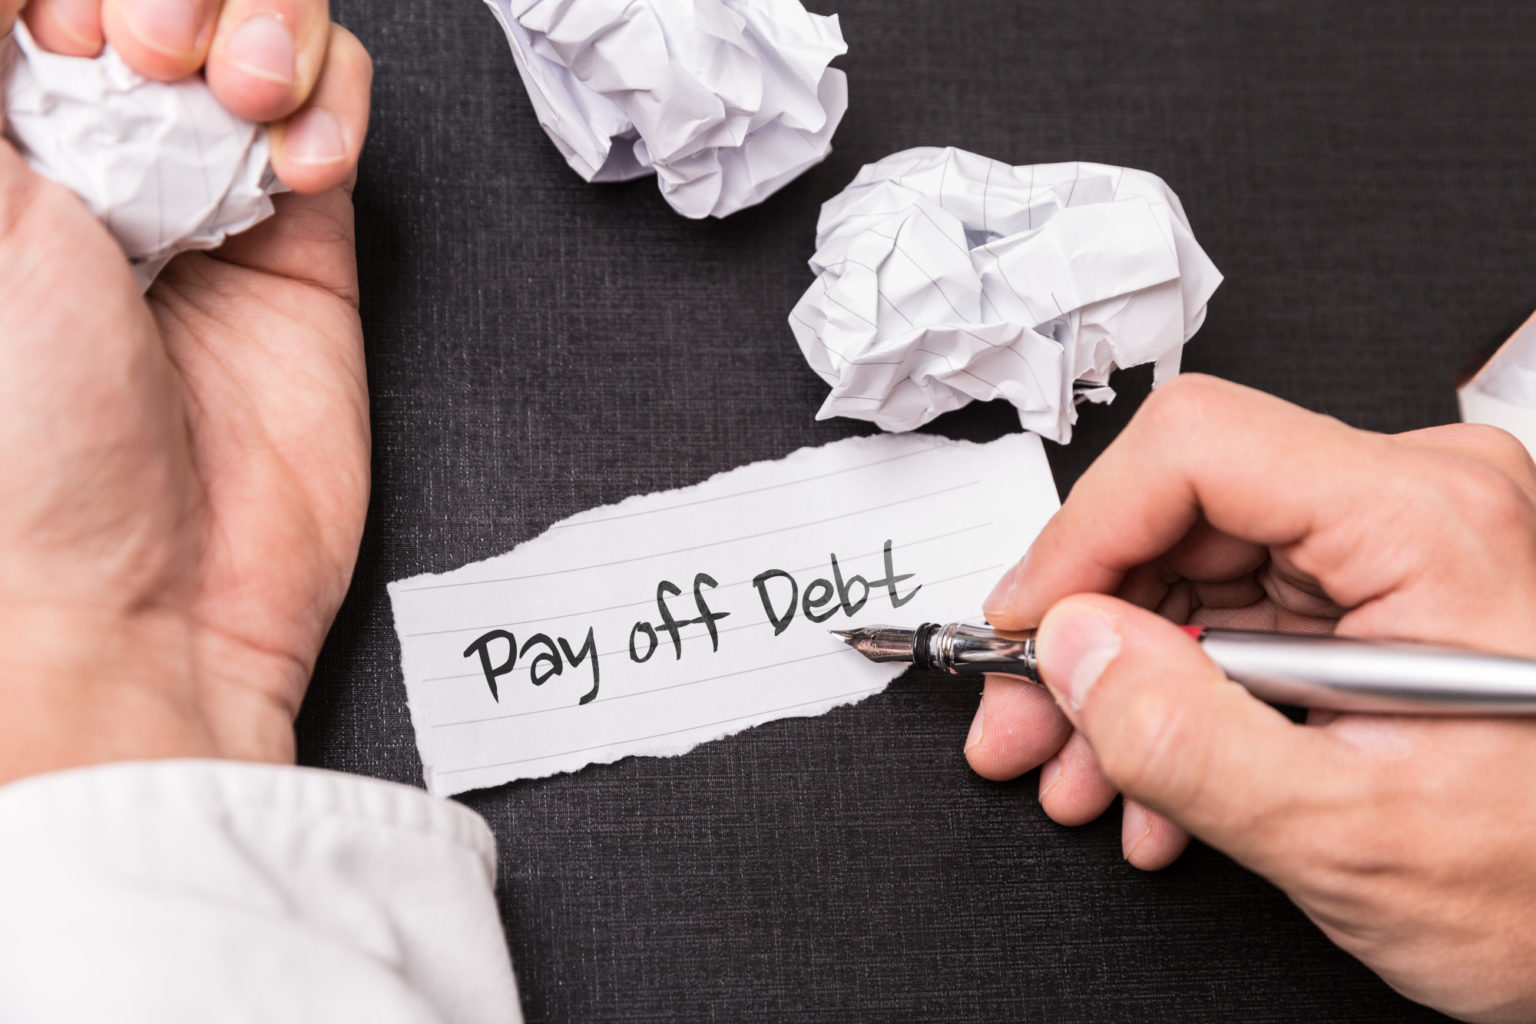 The National Debt Relief Program An Insight into the Pros & Cons